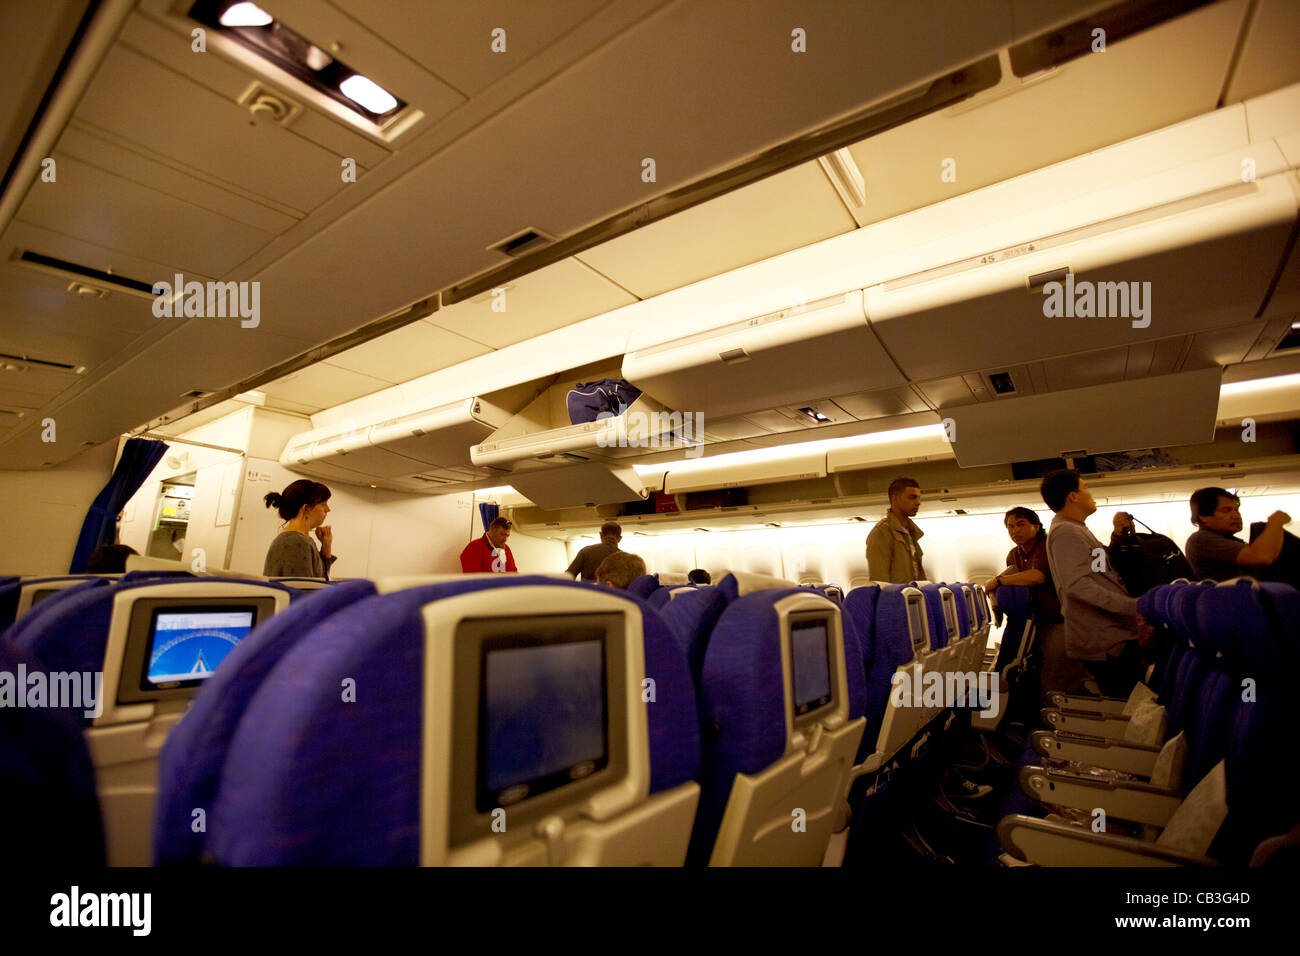 passengers boarding a 747 passenger aircraft with open overhead lockers Stock Photo